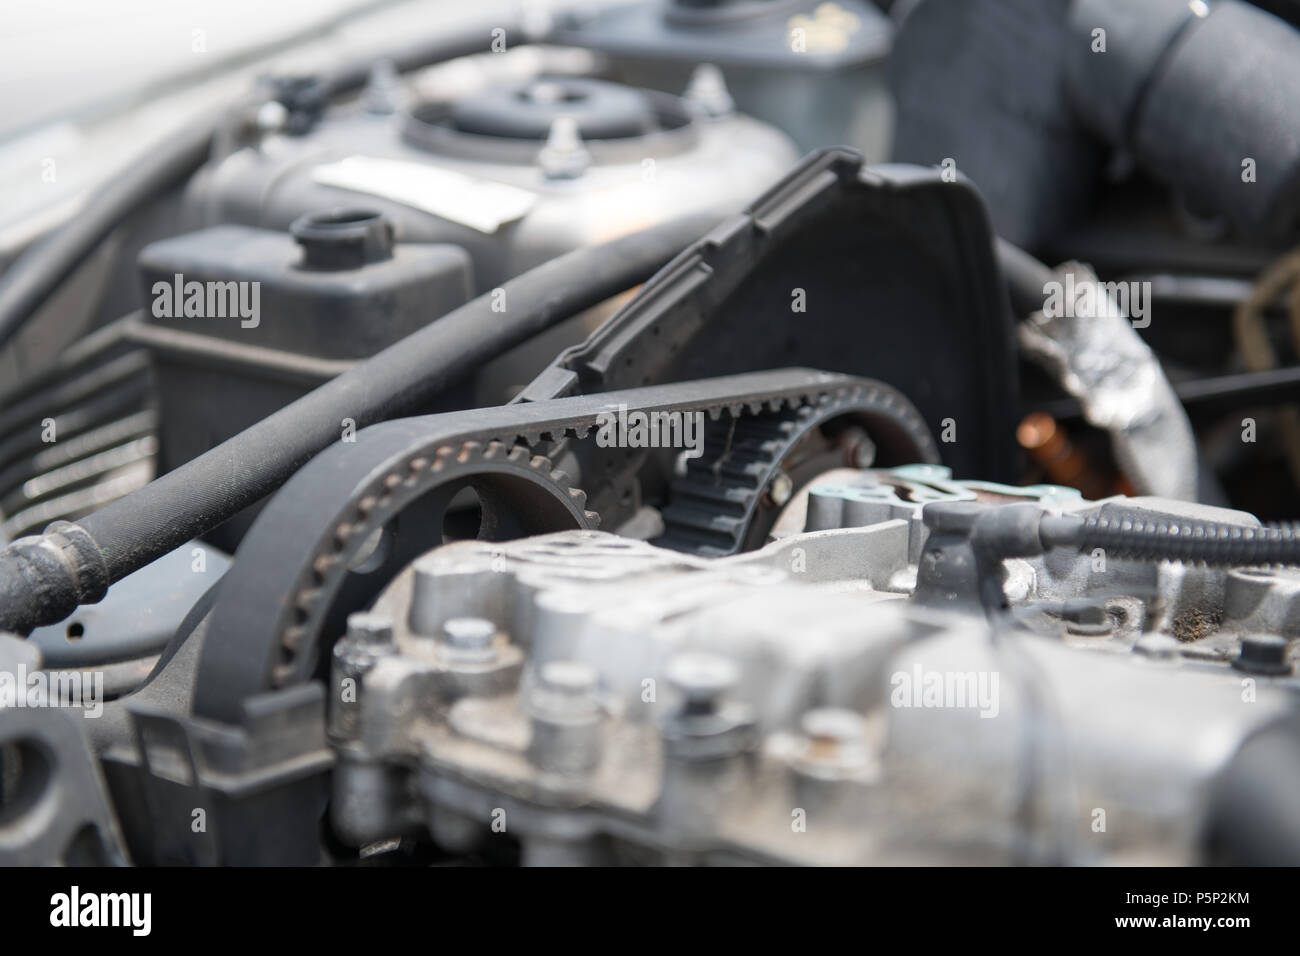 The timing belt of an automobile engine is visible on the side of the engine. Stock Photo